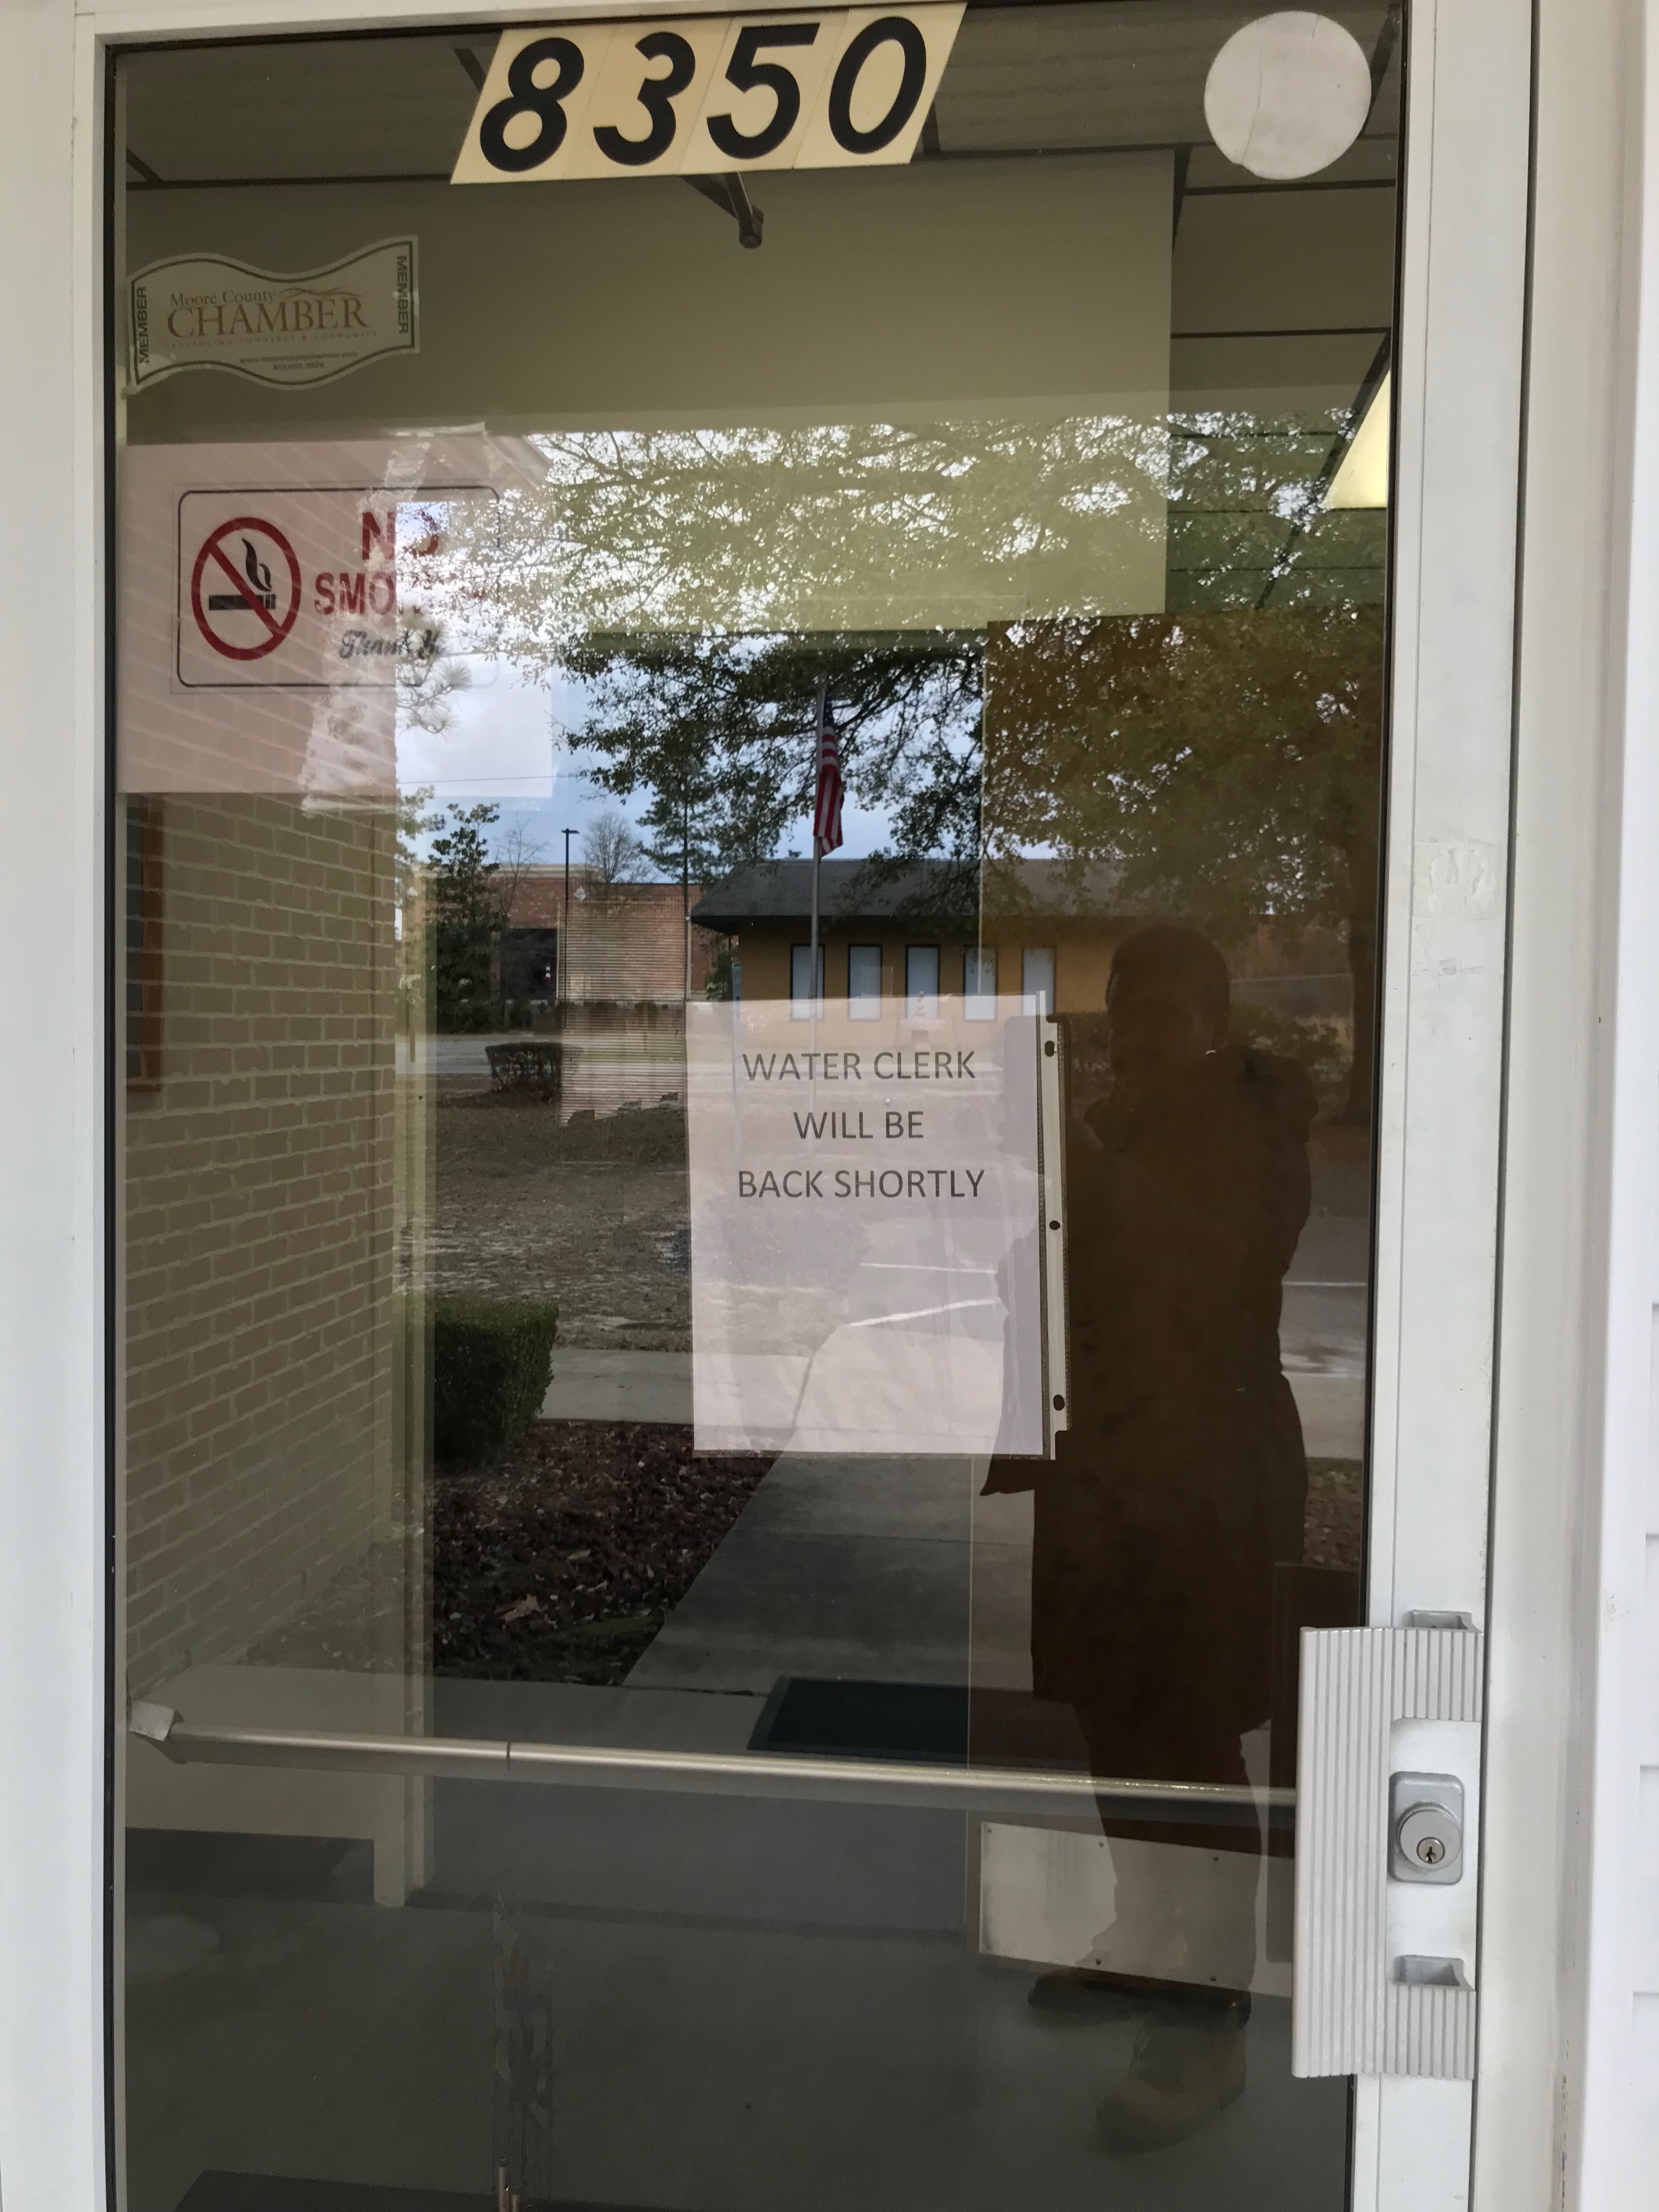 Glass door shown with typewritten sign, taped to the inside of the door, reading "Water Clerk will be back shortly." Silhouette of photographer shown in reflection.